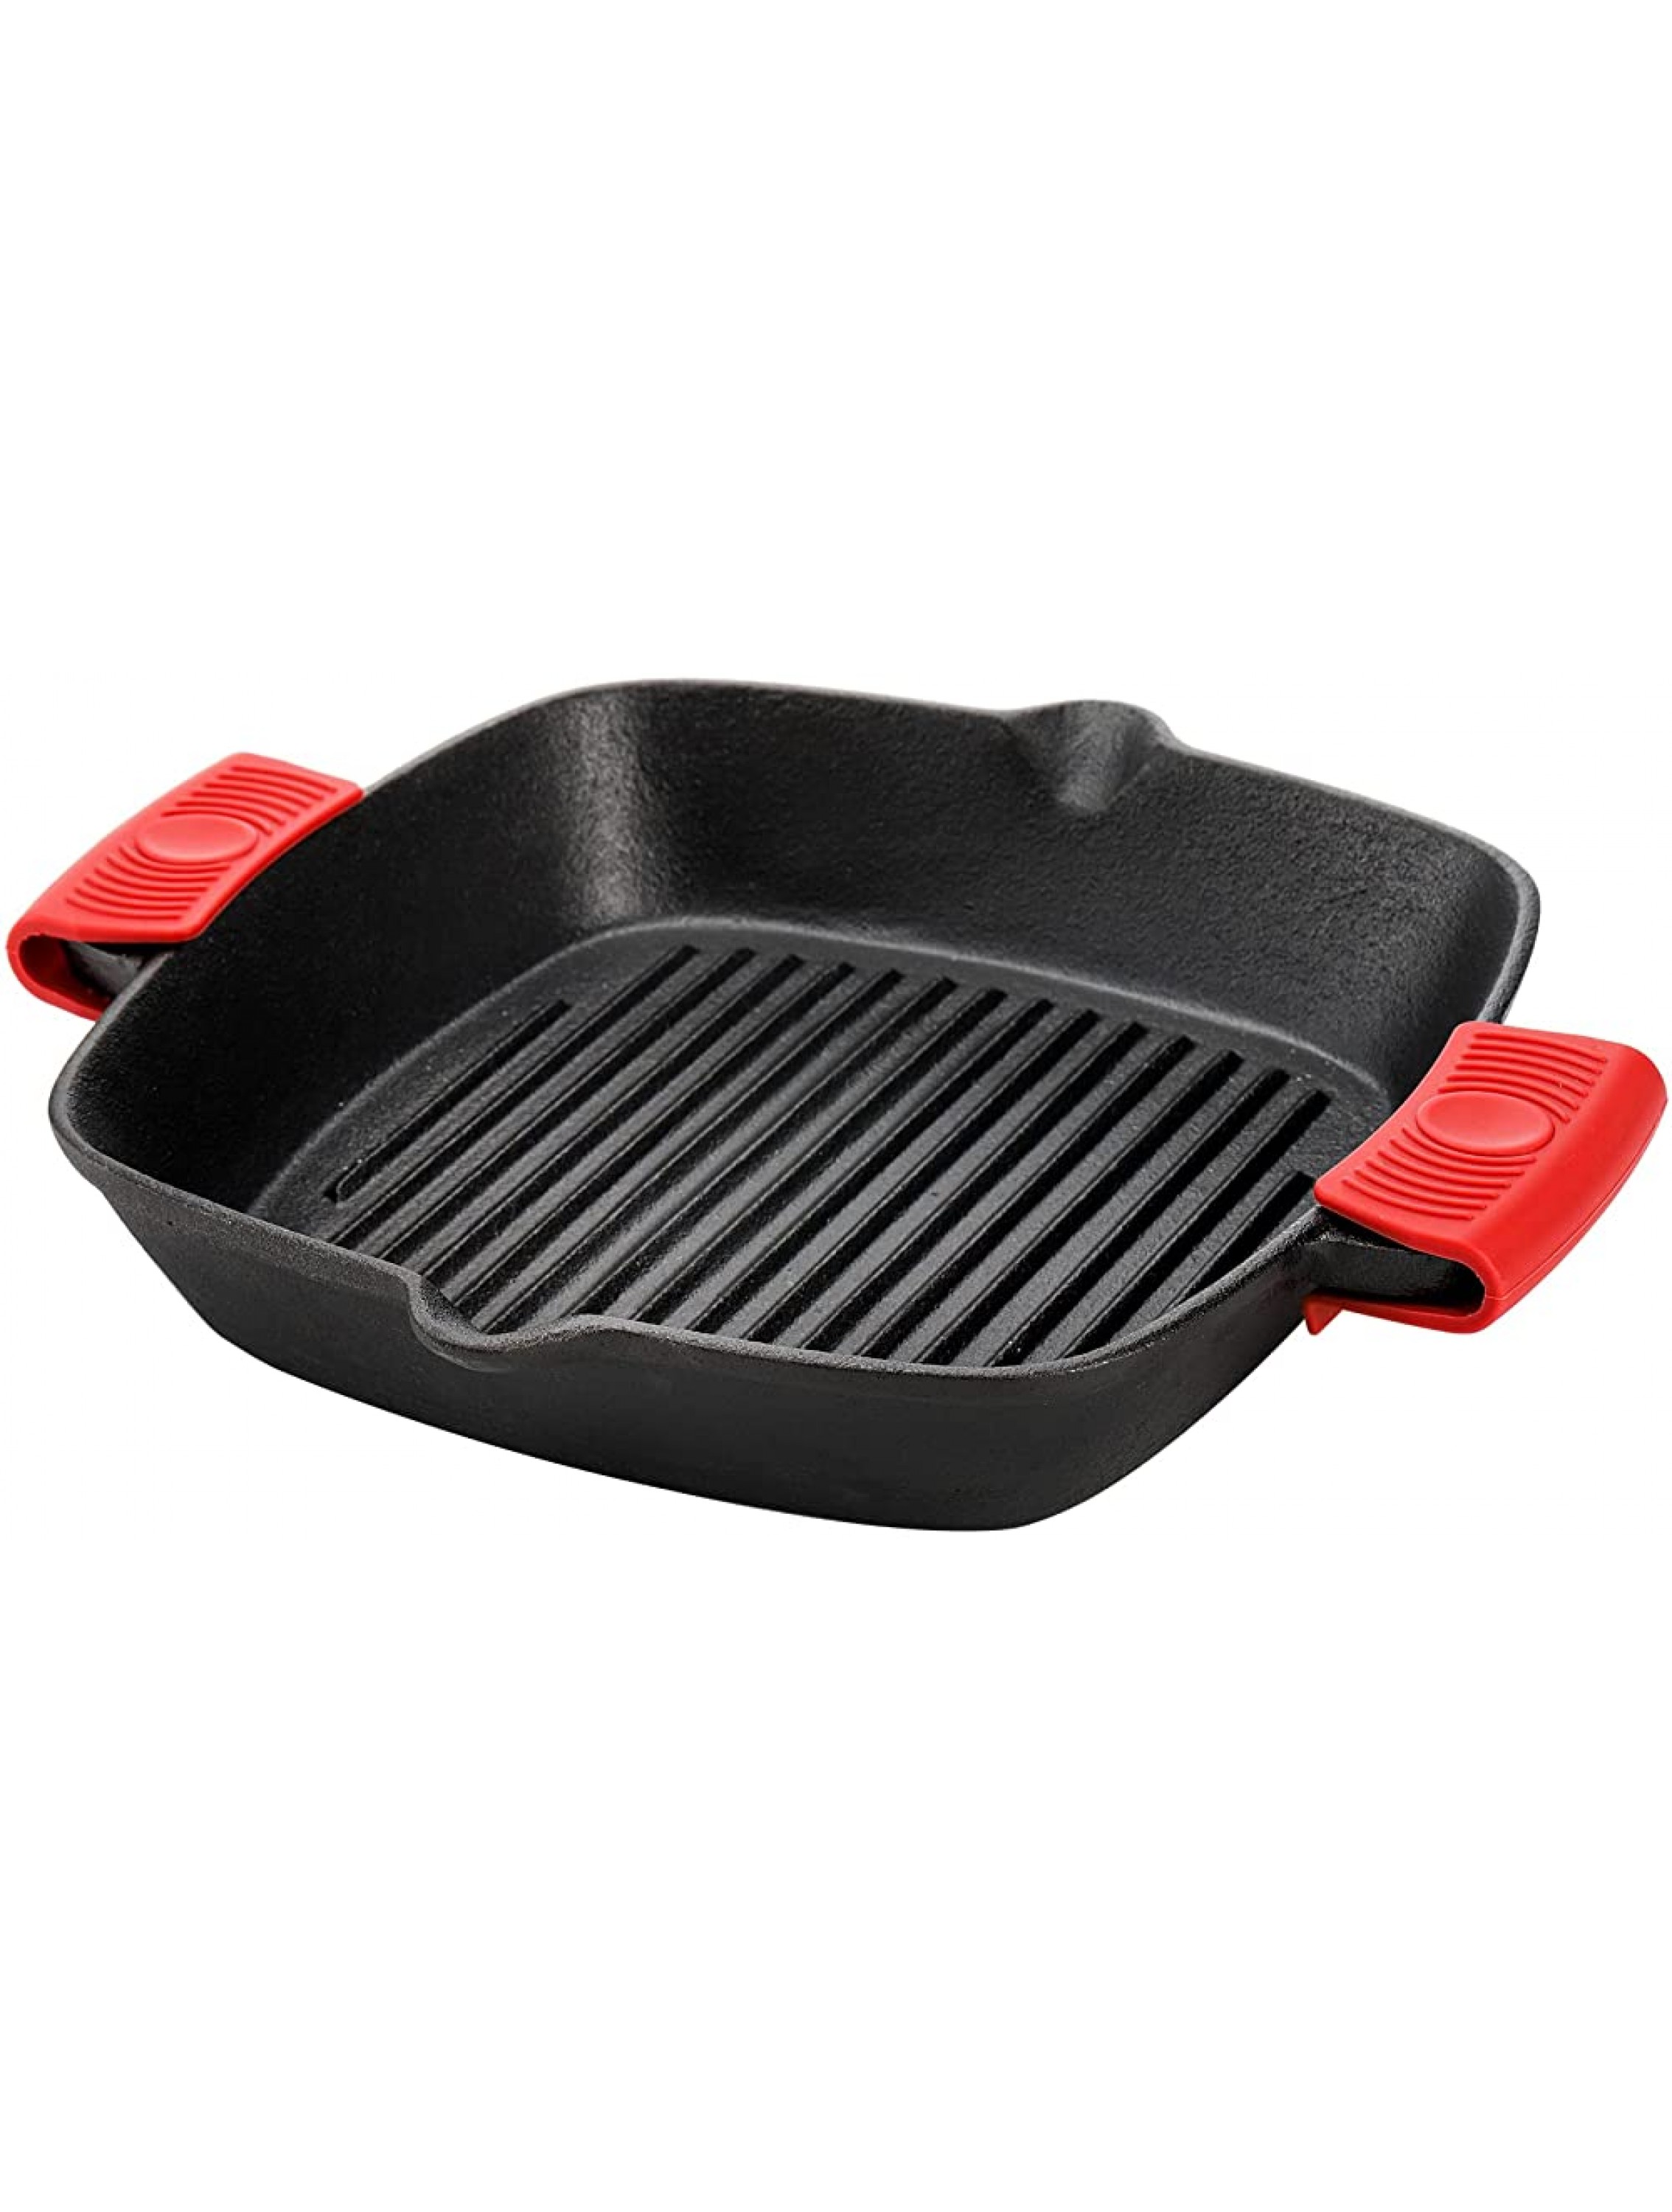 ZOOFOX Cast Iron Grill Pan 10 Square Skillet with Easy Grease Drain Spout and Two Heat Insulated Silicone Handle Cover Pre Seasoned Grill Pan for Grilling Bacon Steak Meats Camping and Barbecue - BR0INTD6U